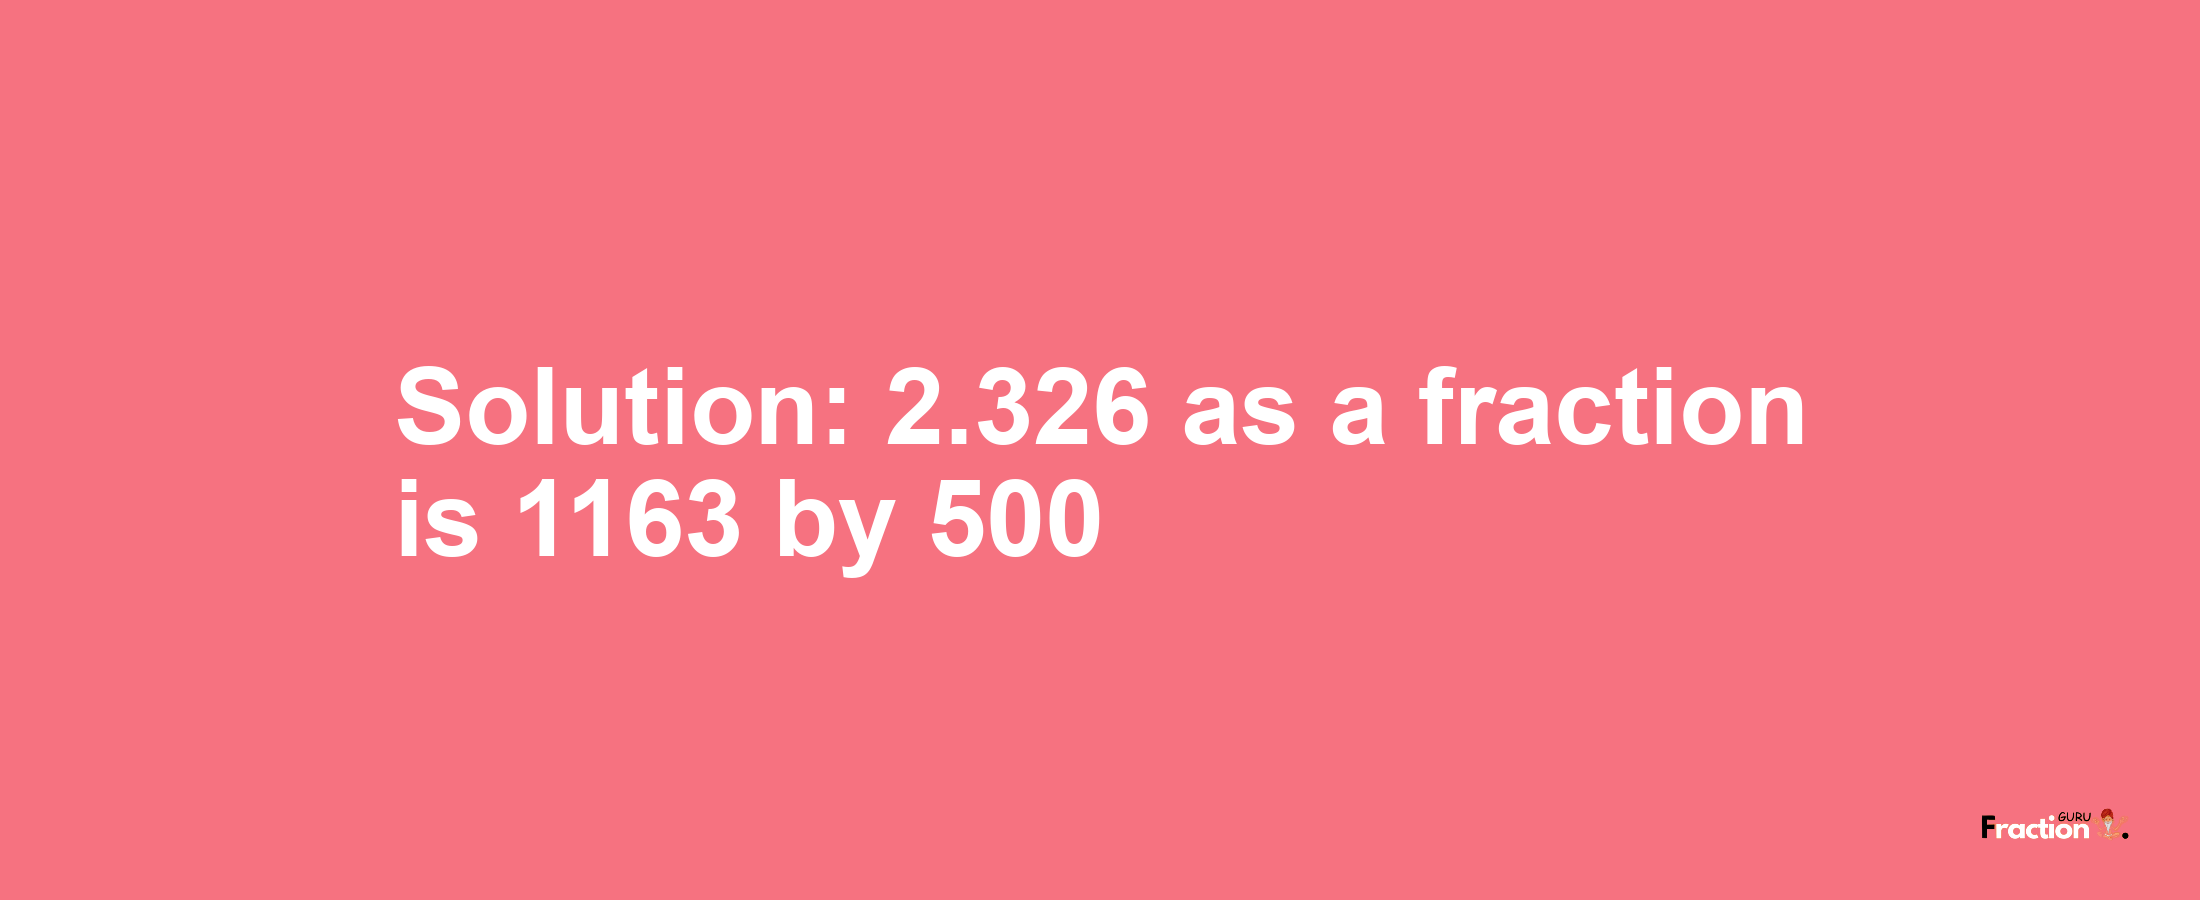 Solution:2.326 as a fraction is 1163/500